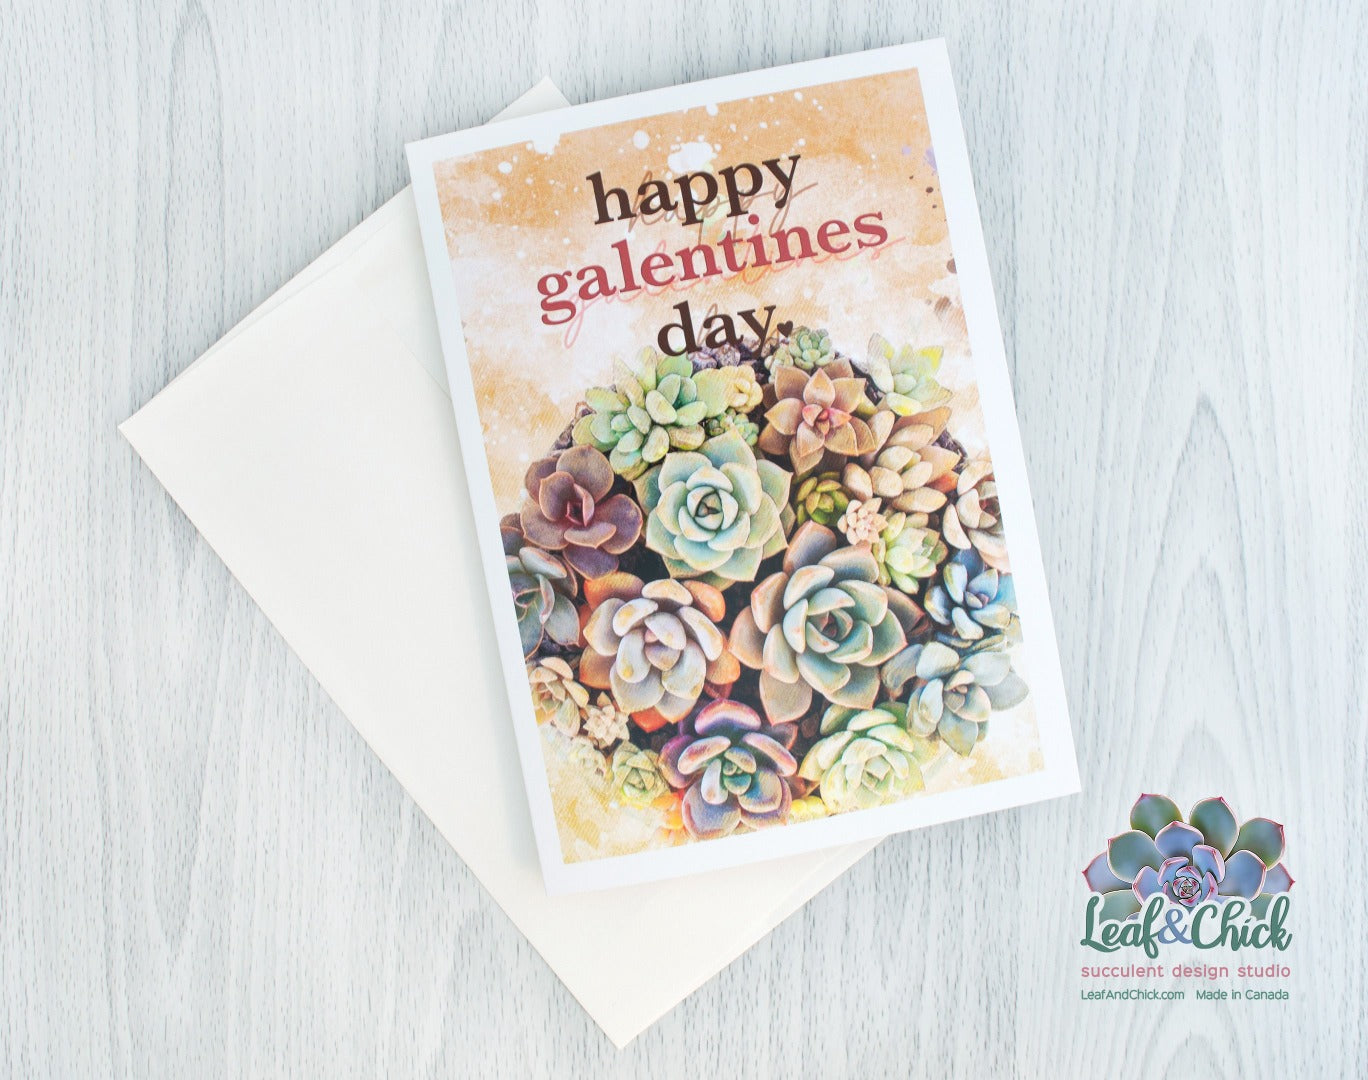 happy galentines day card